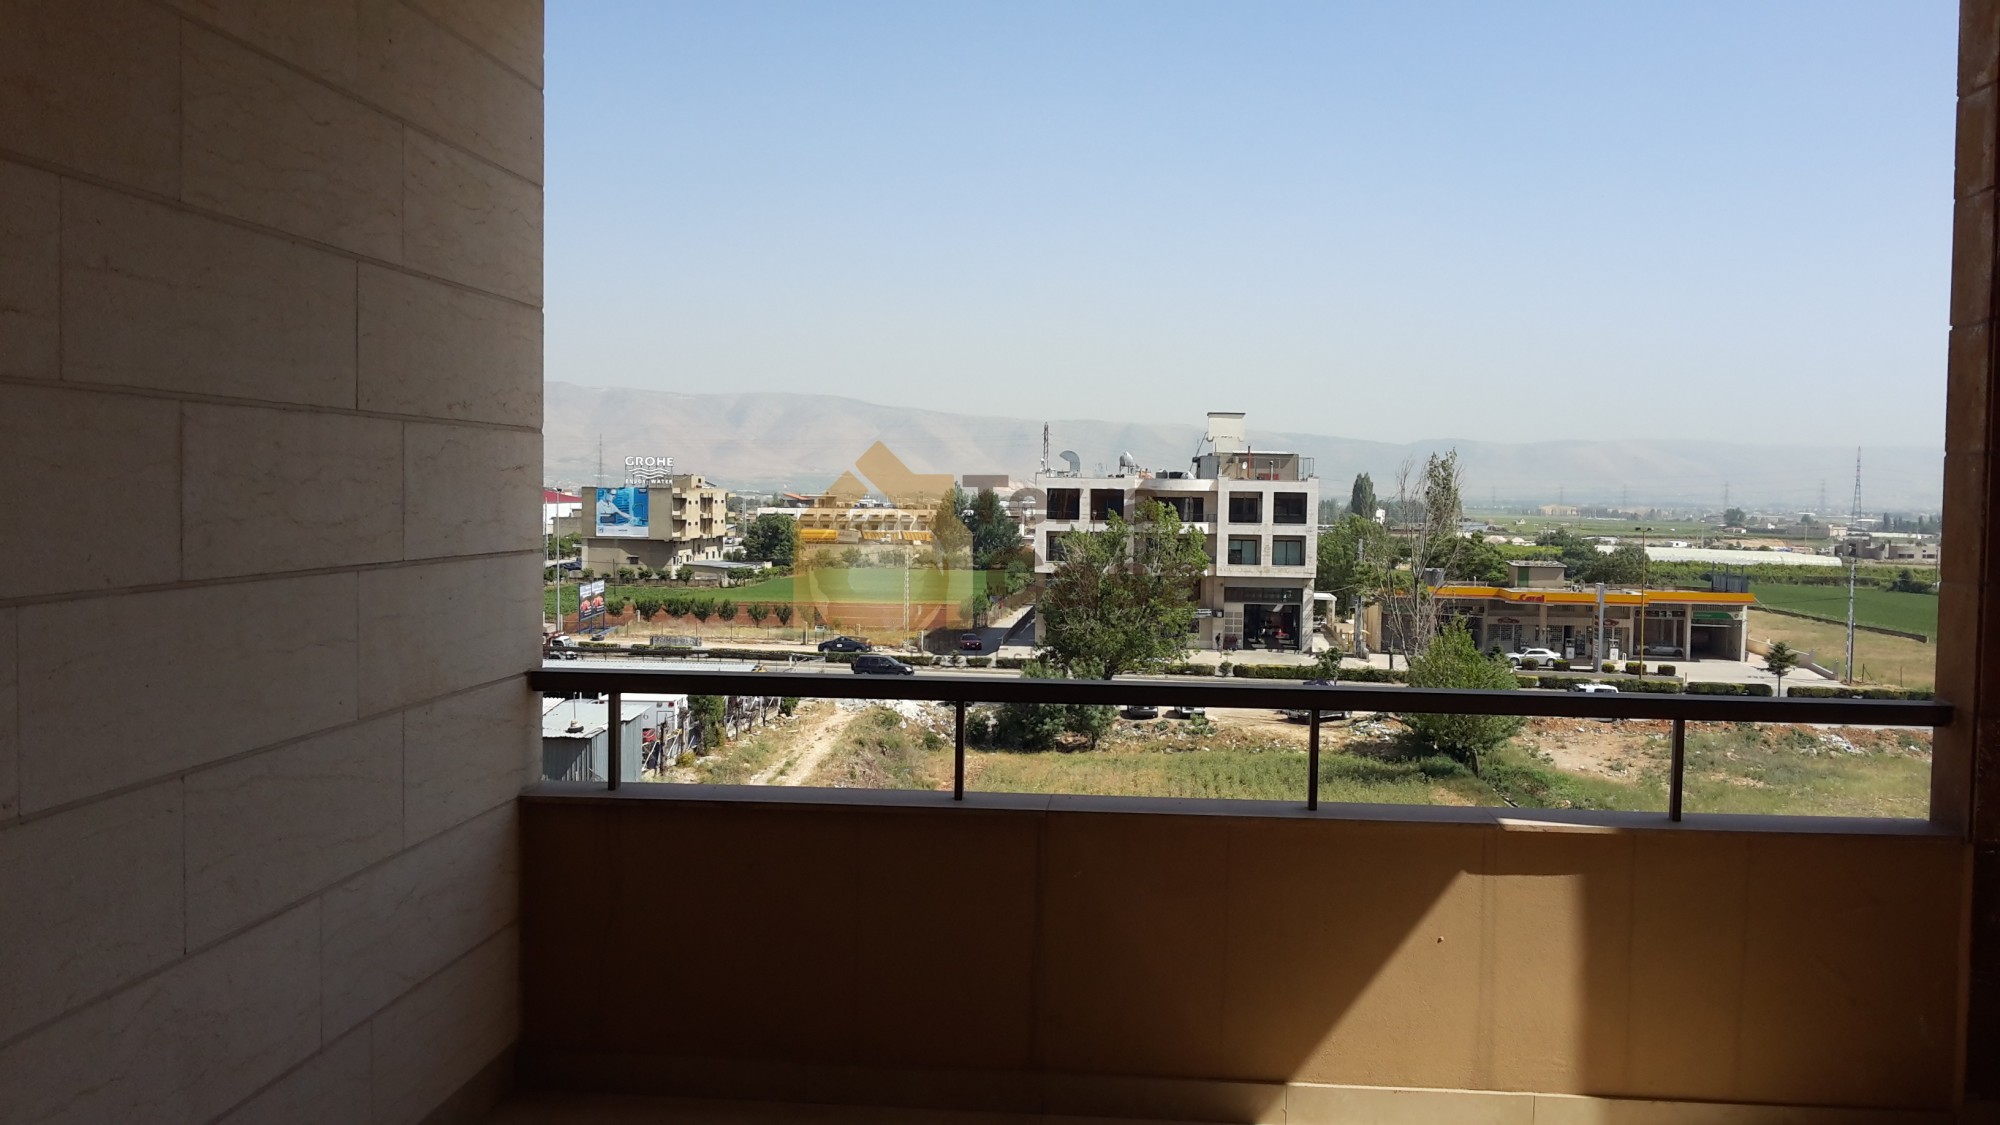 Apartment for sale in Haouch el omara brand new  in a prime location  Ref#389